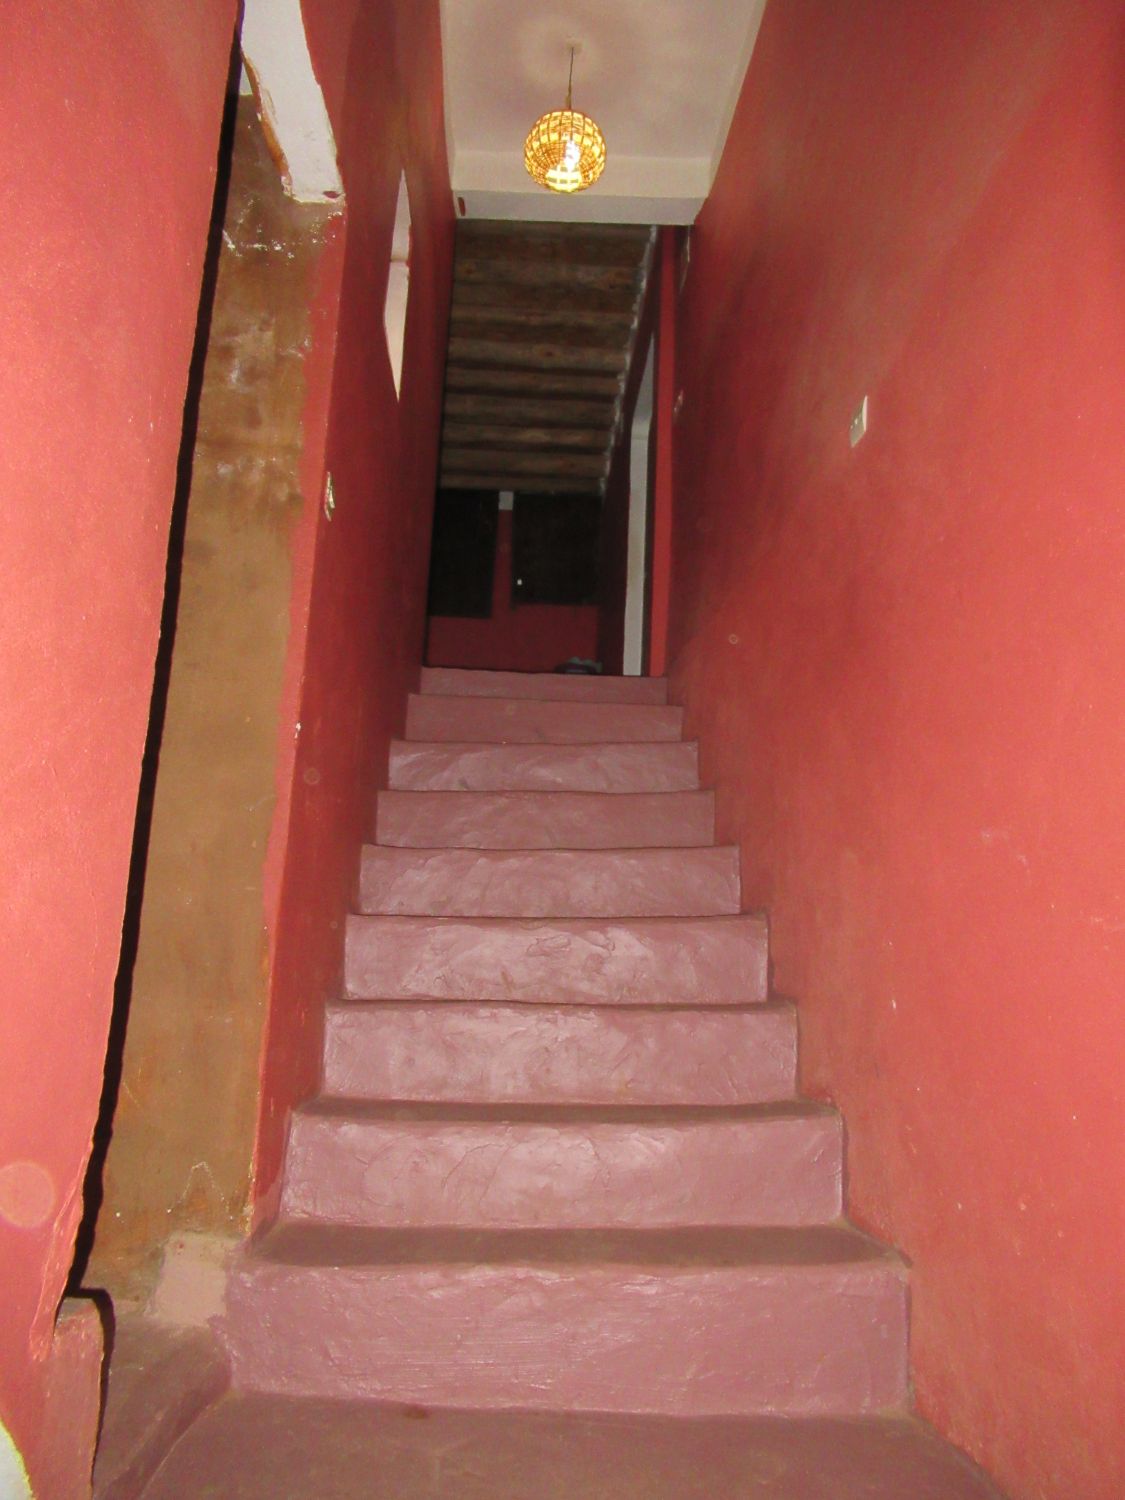 Staircase to the second floor.